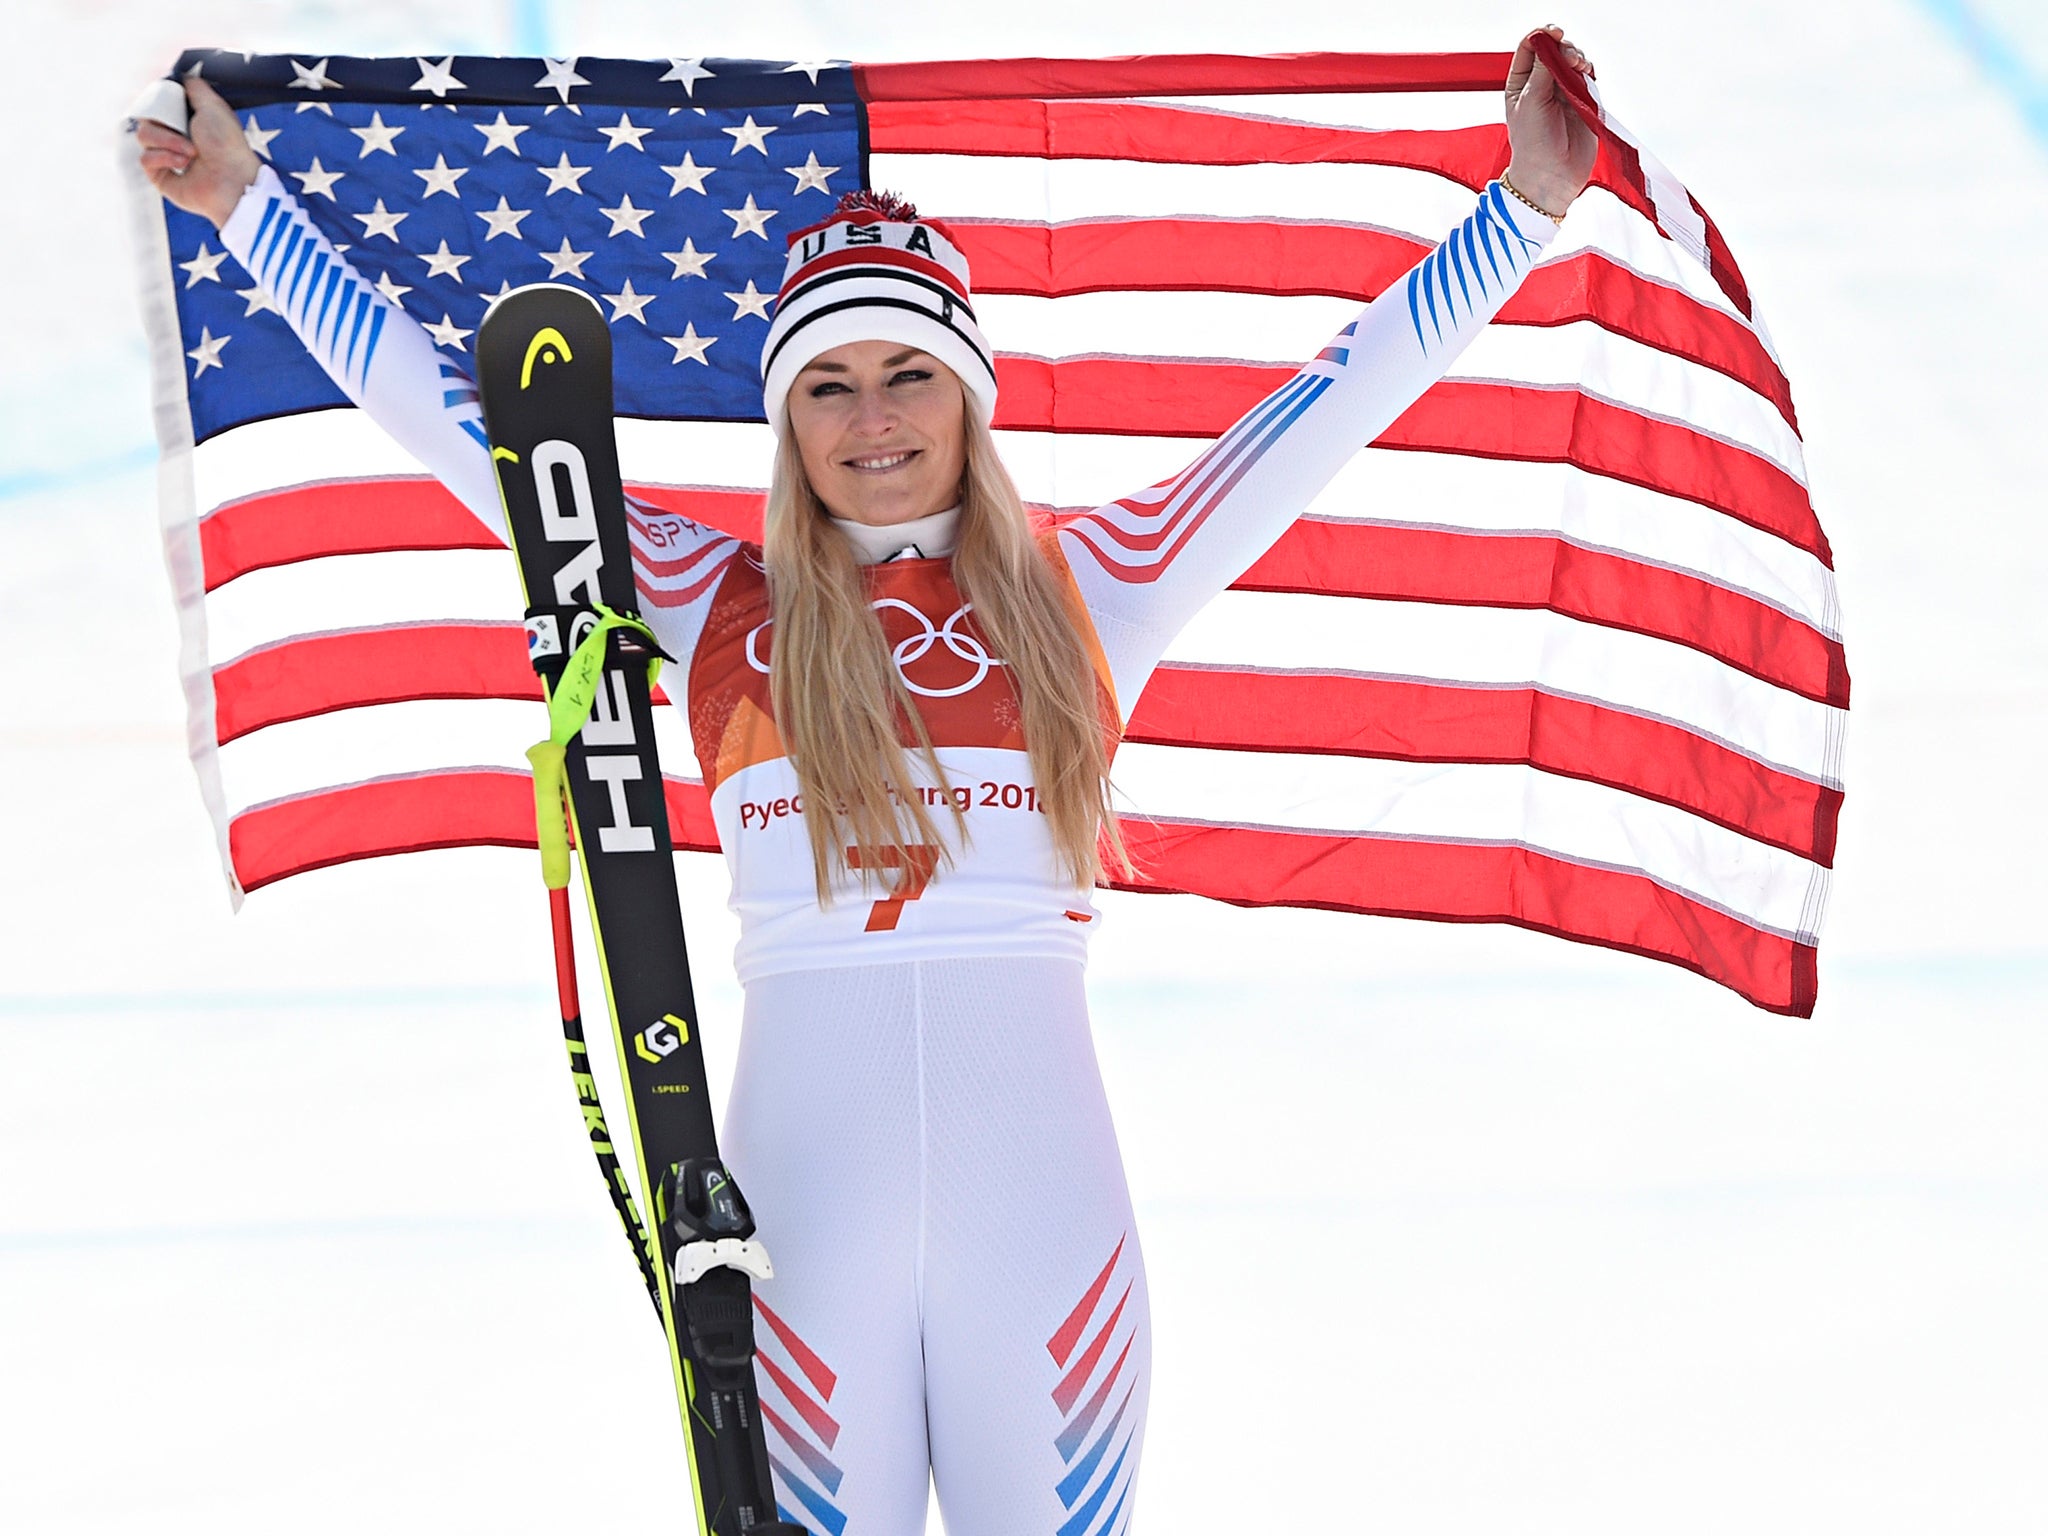 Vonn is not expected to compete at the 2022 Winter Olympics